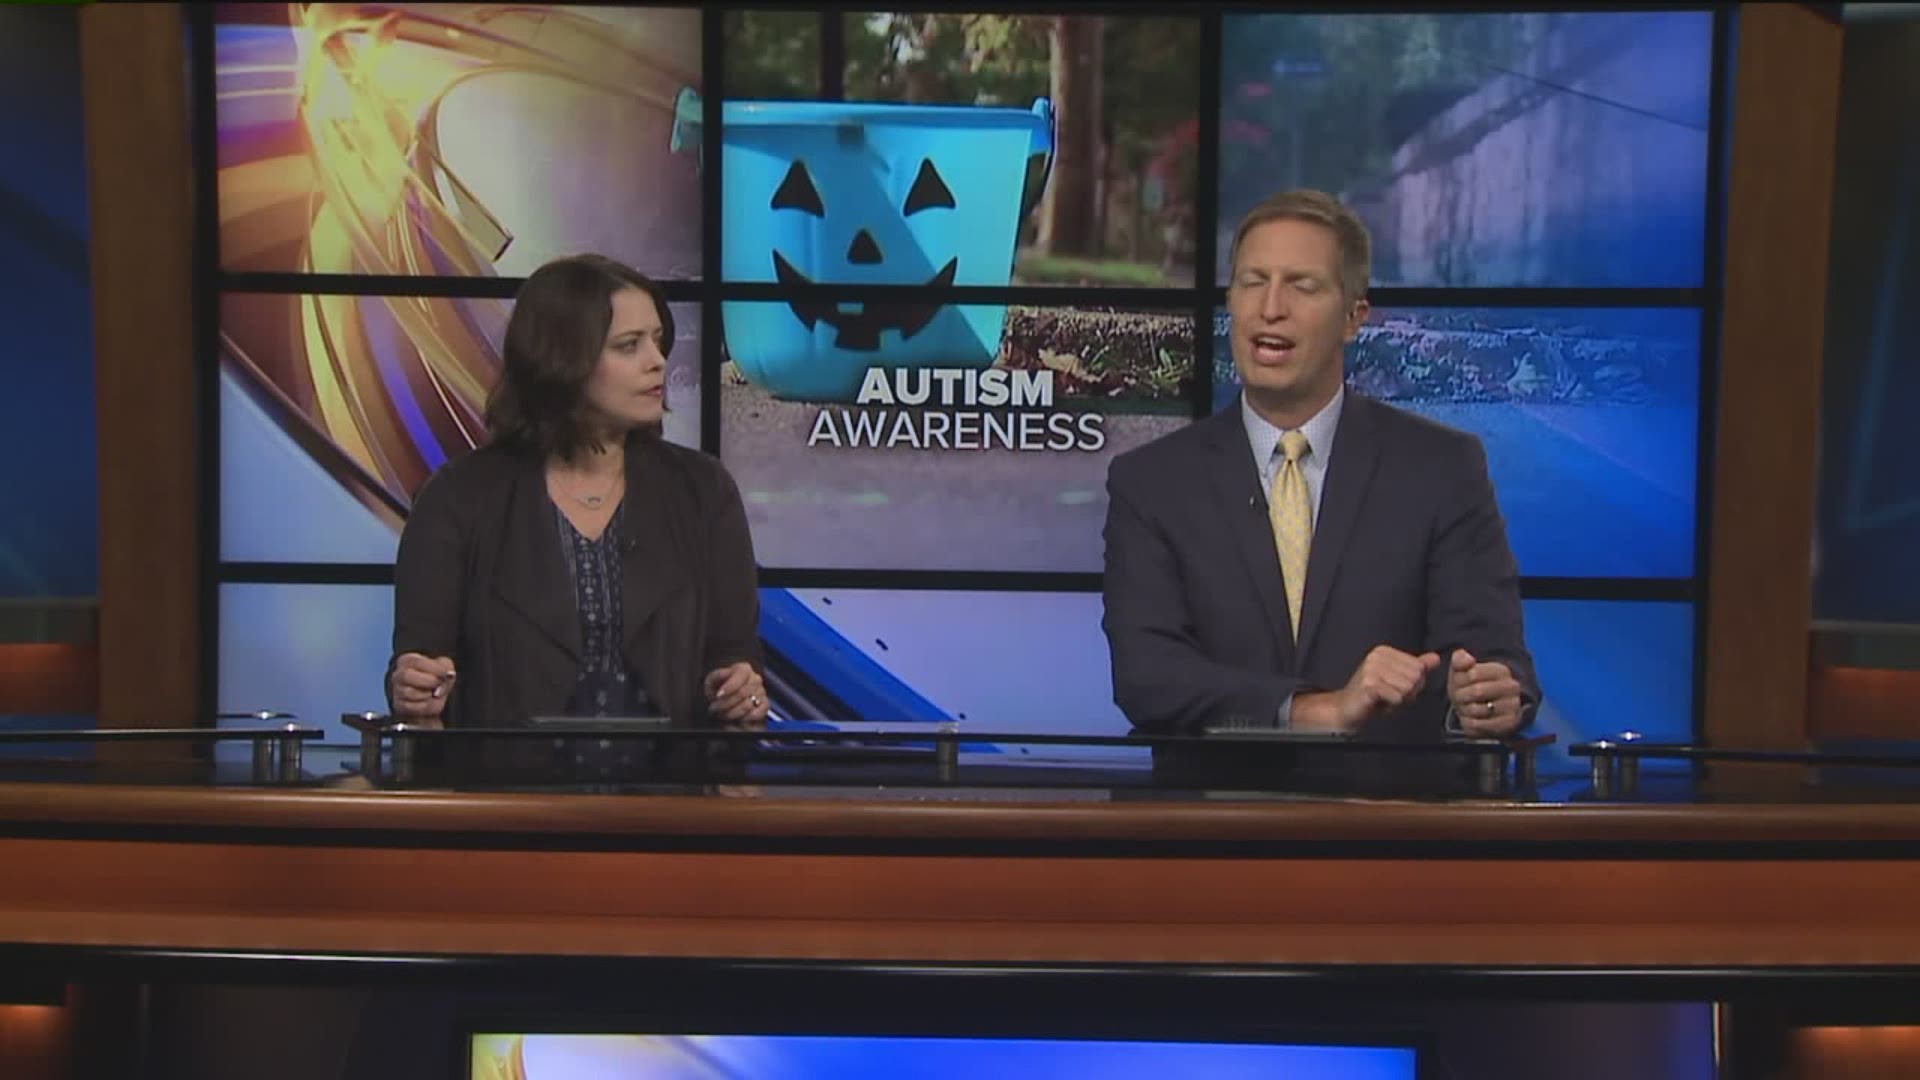 The tradition of going door-to-door on Halloween is easy for most people. However, for some kids who have autism, it can be challenging. (WNEP)